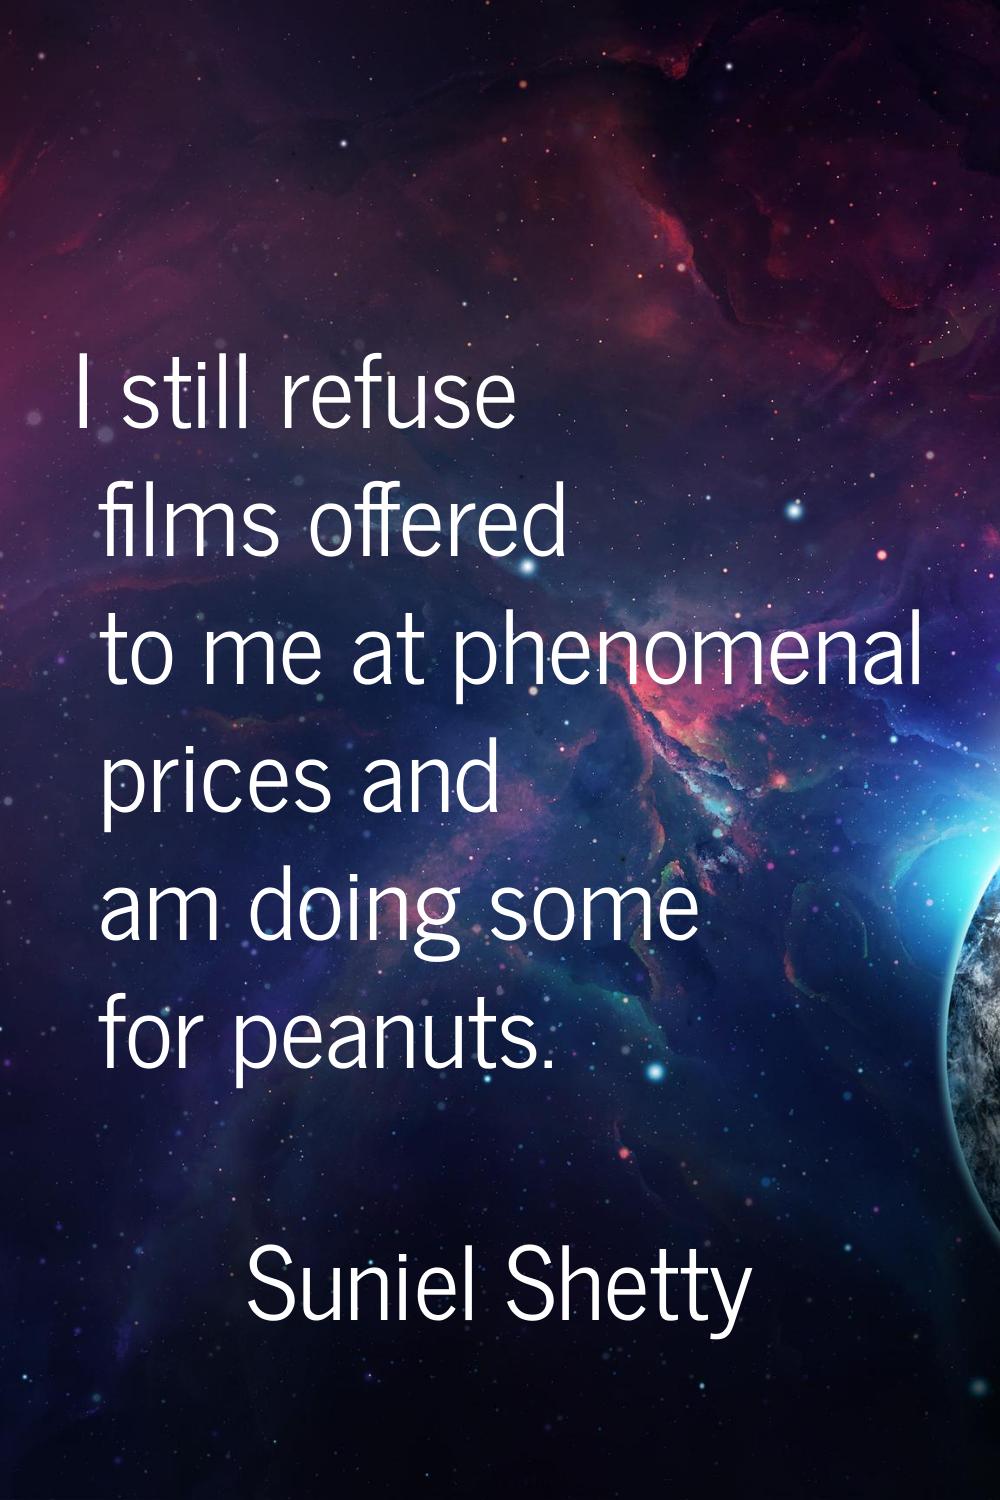 I still refuse films offered to me at phenomenal prices and am doing some for peanuts.